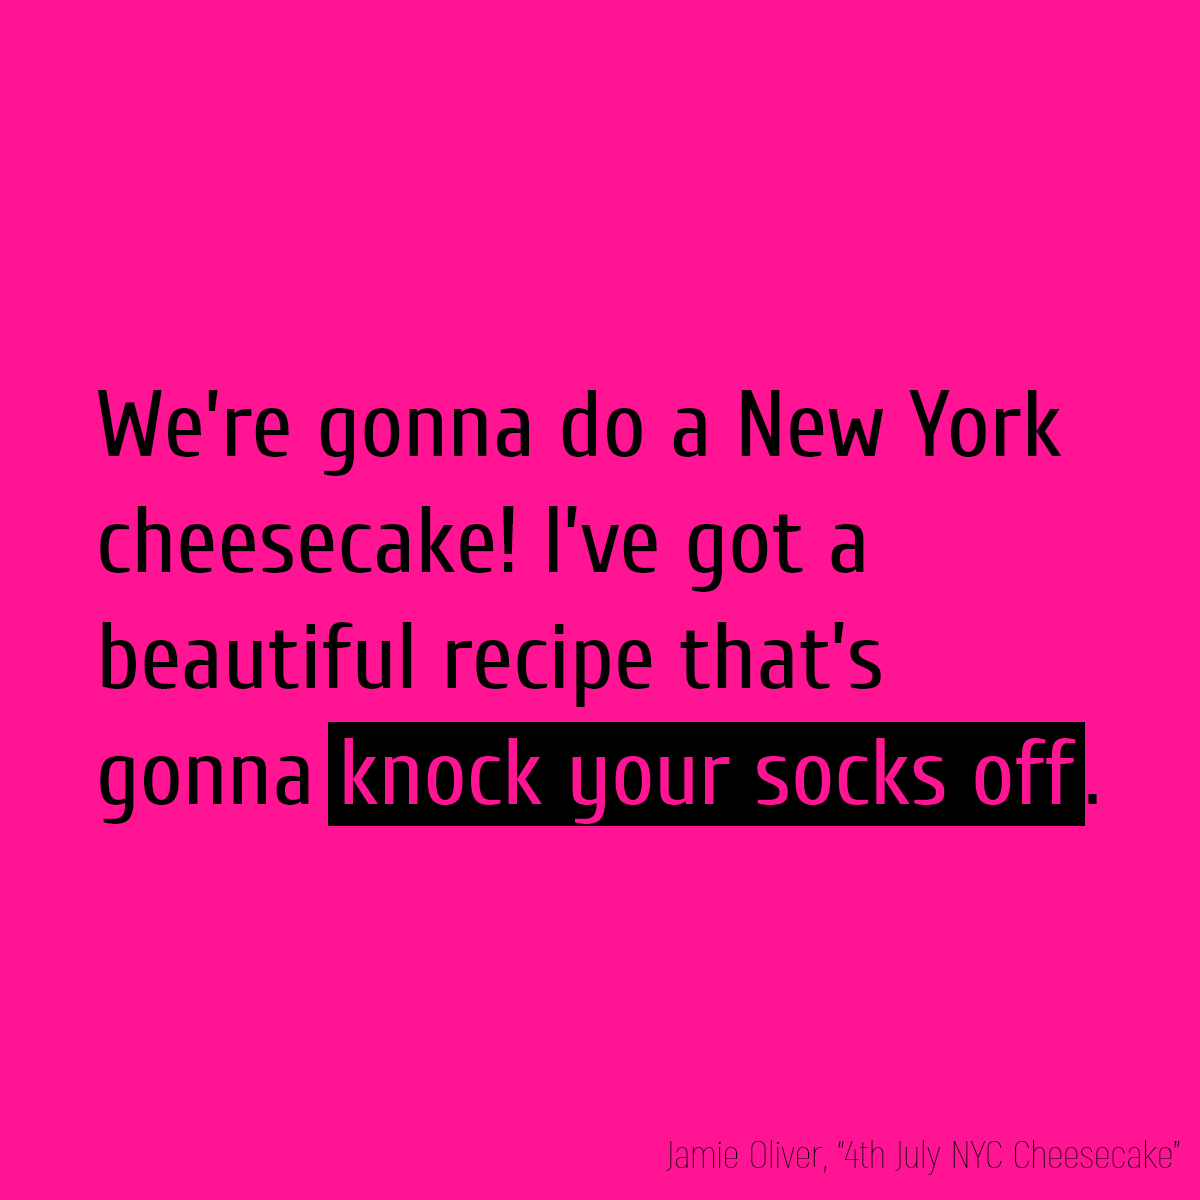 We’re gonna do a New York cheesecake! I’ve got a beautiful recipe that’s gonna **knock your socks off**.